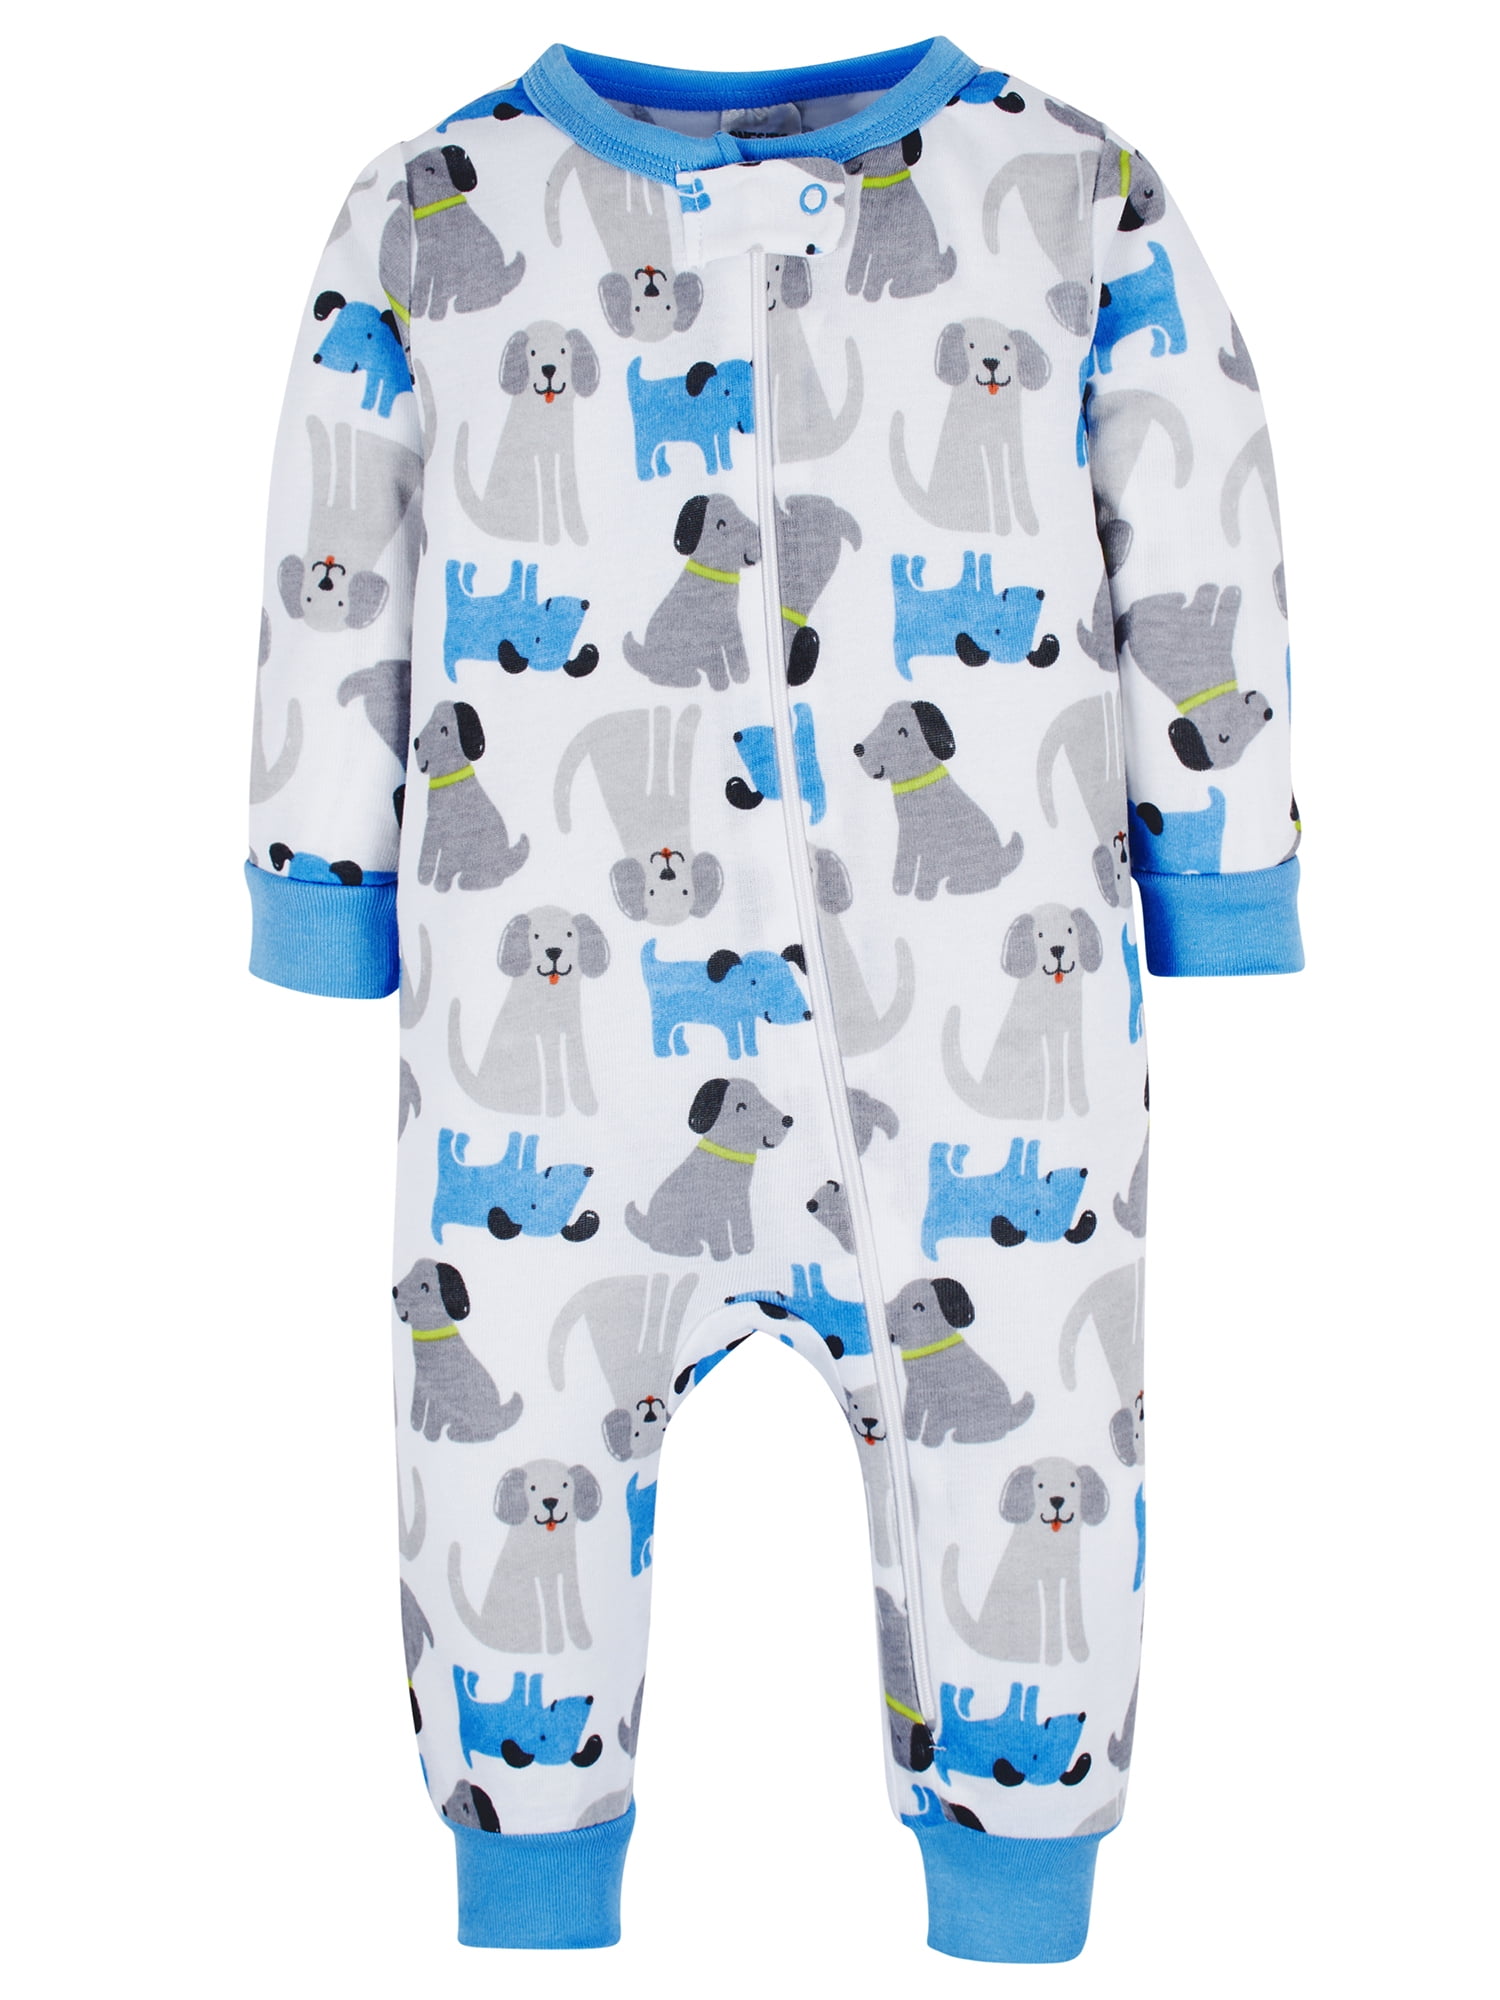 Onesies Brand Baby & Toddler Boy Snug Fit Footless Cotton Pajamas, 3-Pack  (0/3 Months - 5T) 